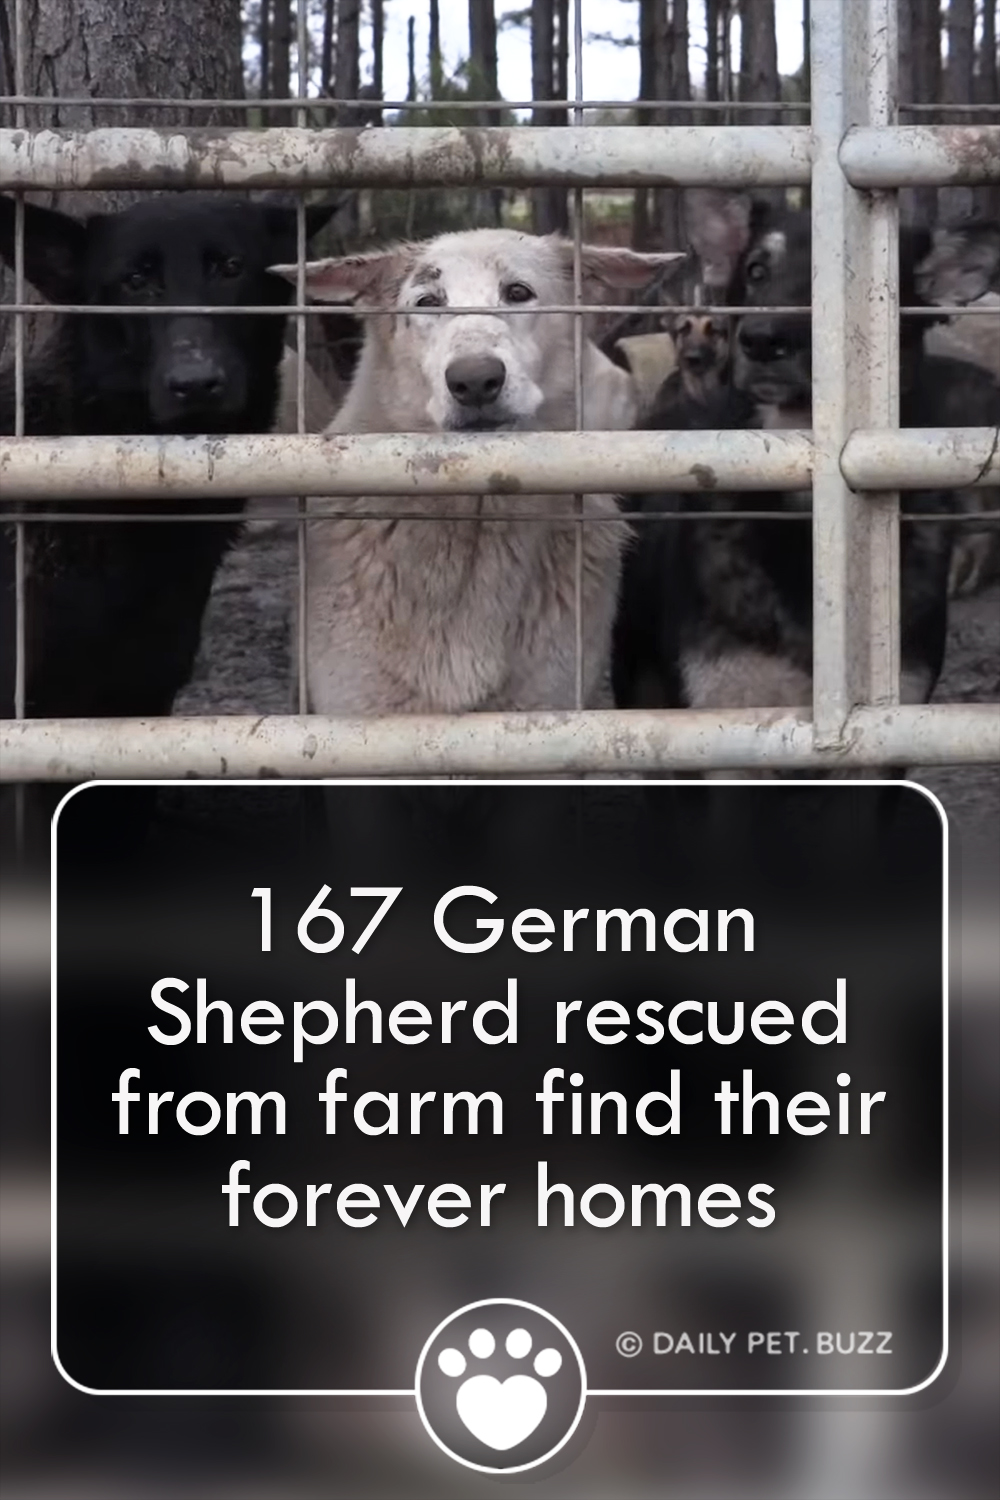 167 German Shepherd rescued from farm find their forever homes